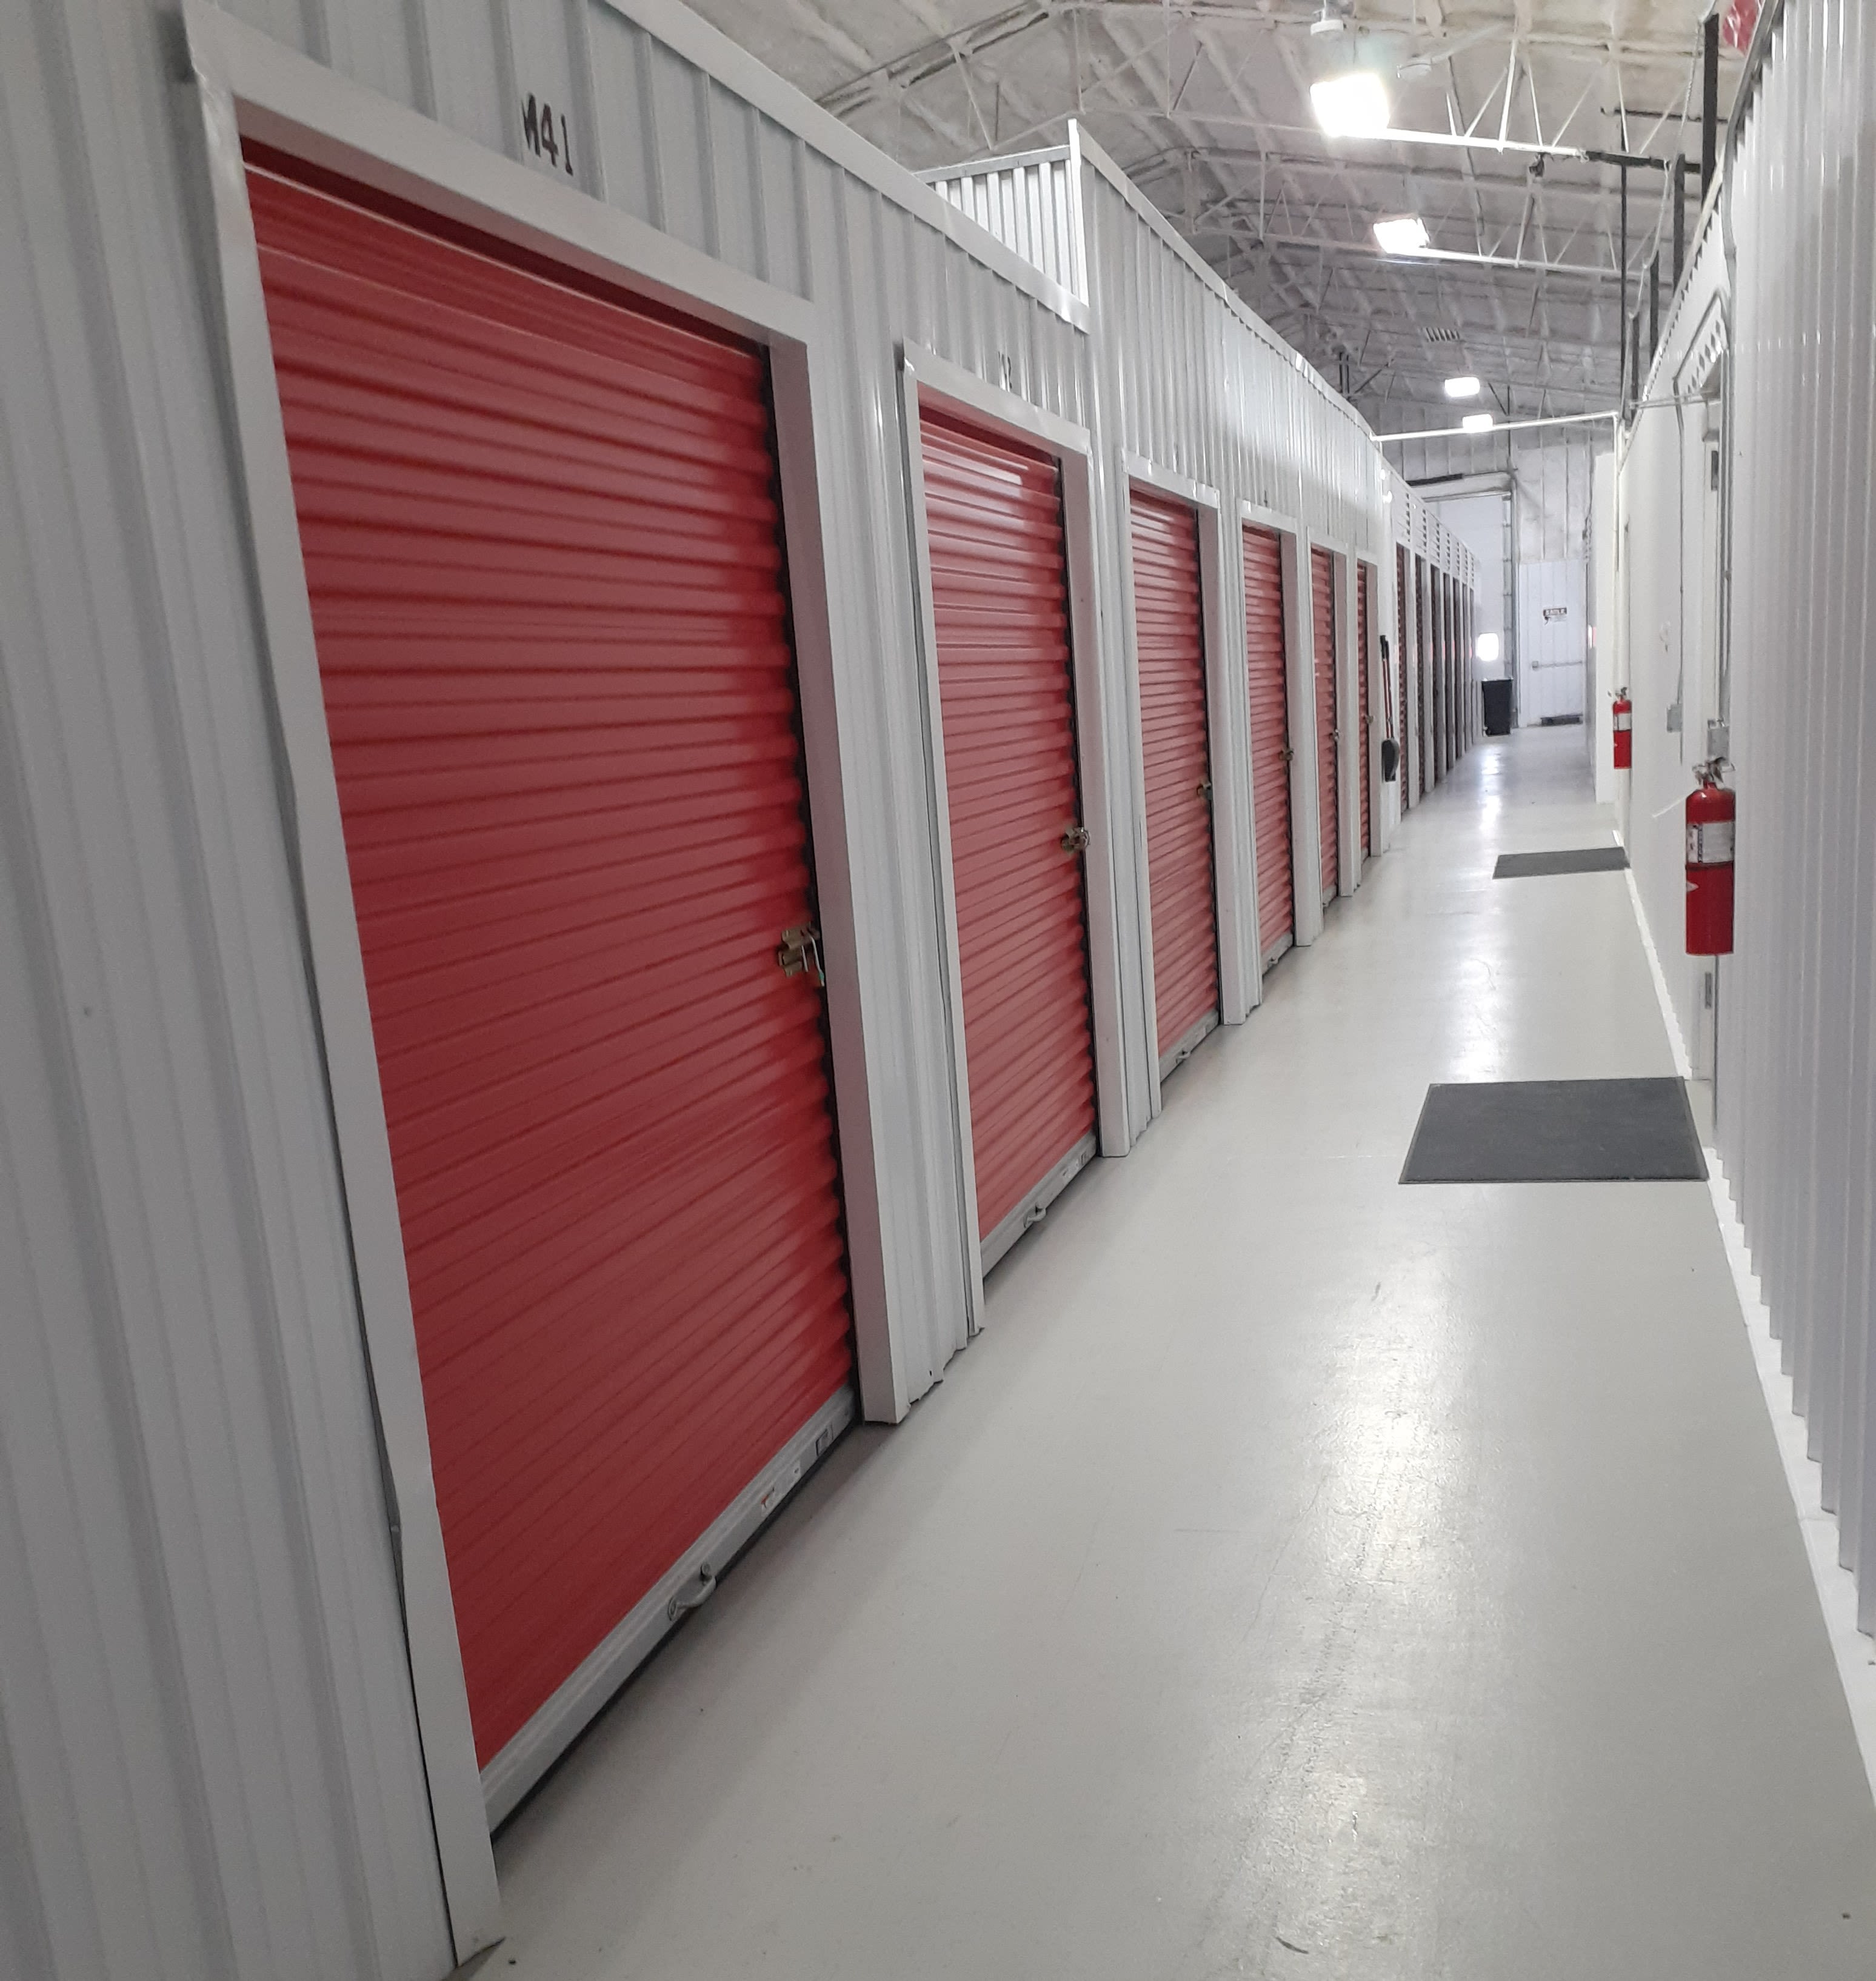 Learn more about features at KO Storage of Jamestown - North in Jamestown, North Dakota